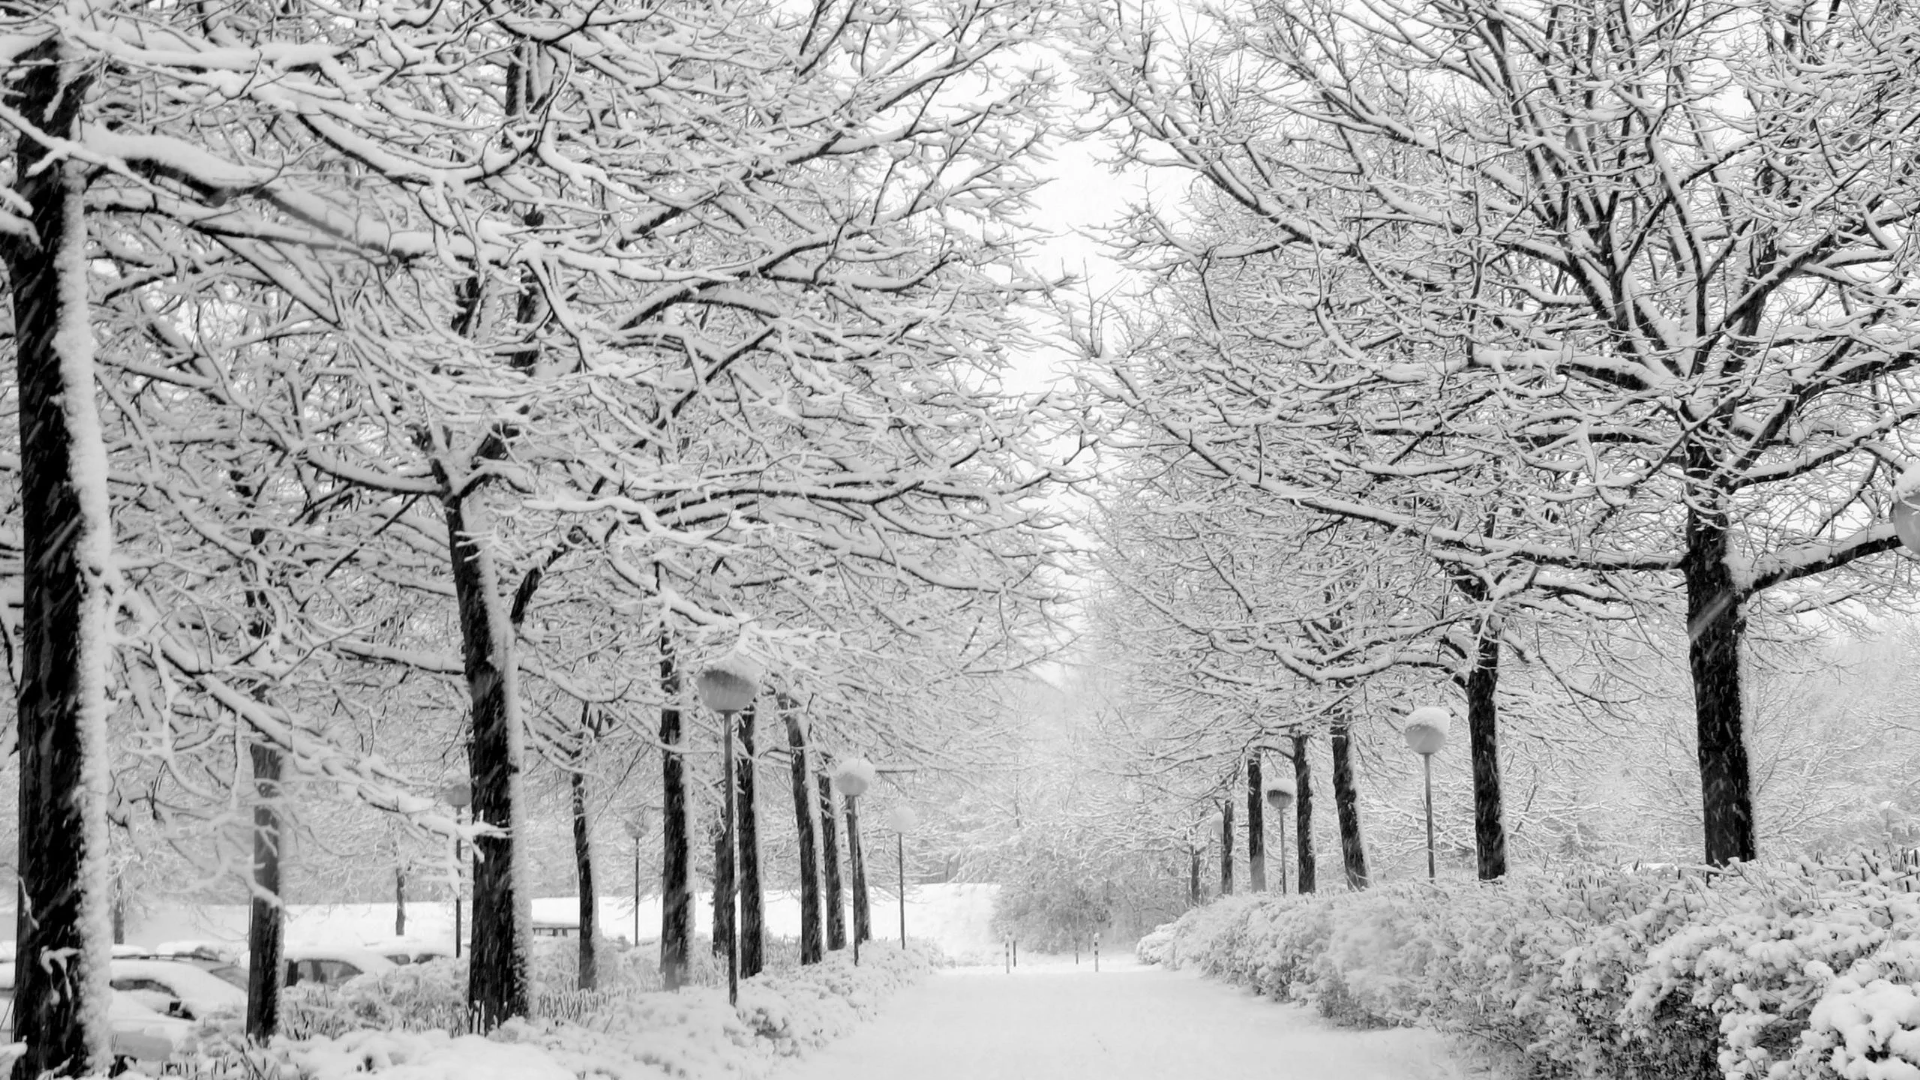 Snowy path background for your Online Meetings